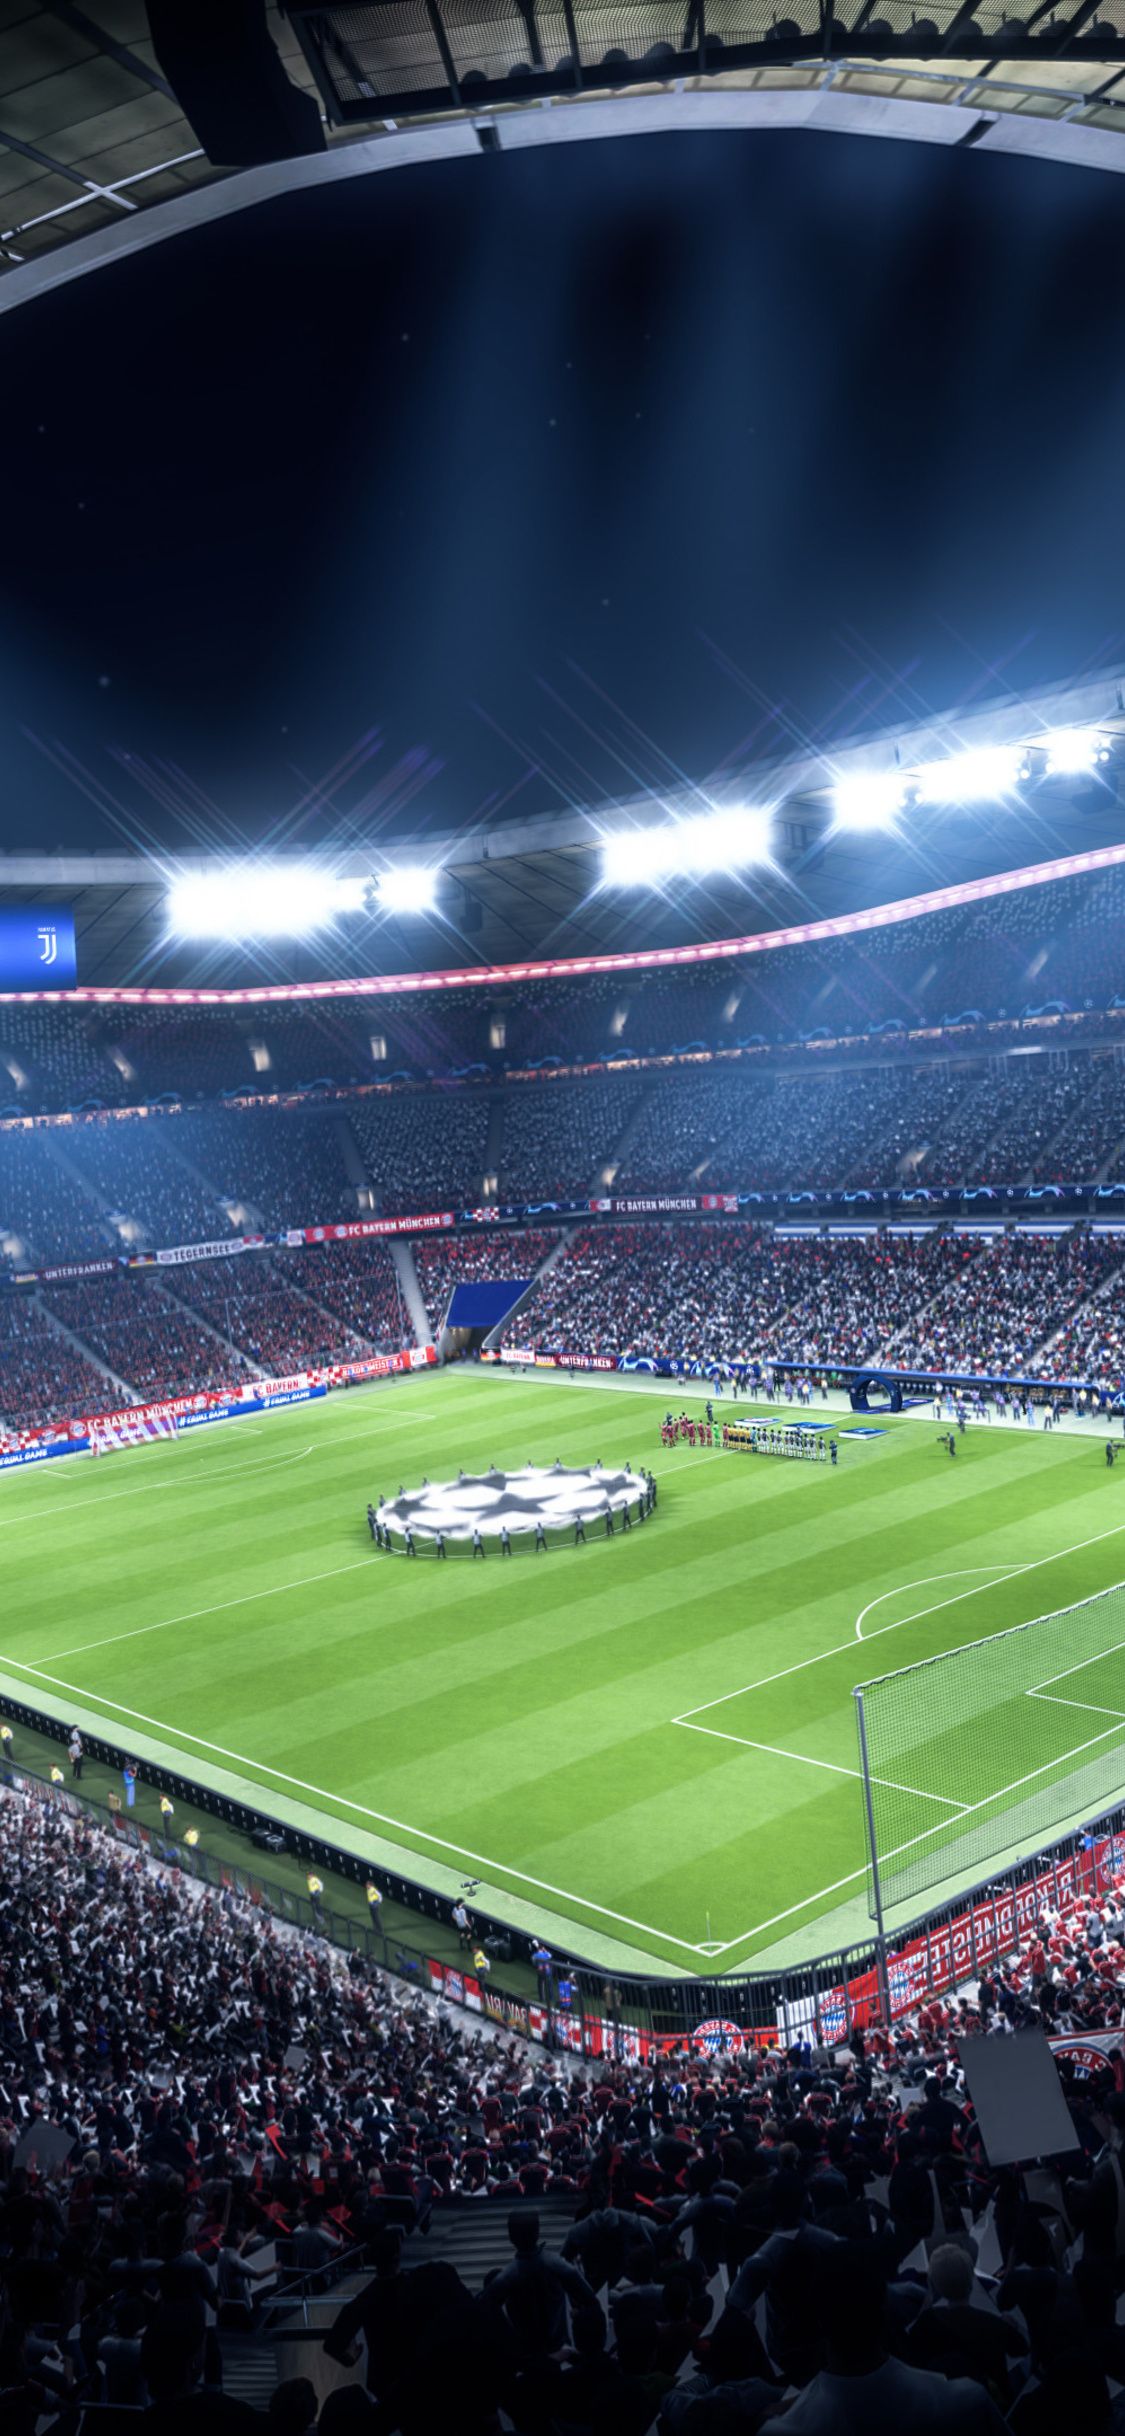 Soccer Stadiums Wallpapers Wallpaper Cave